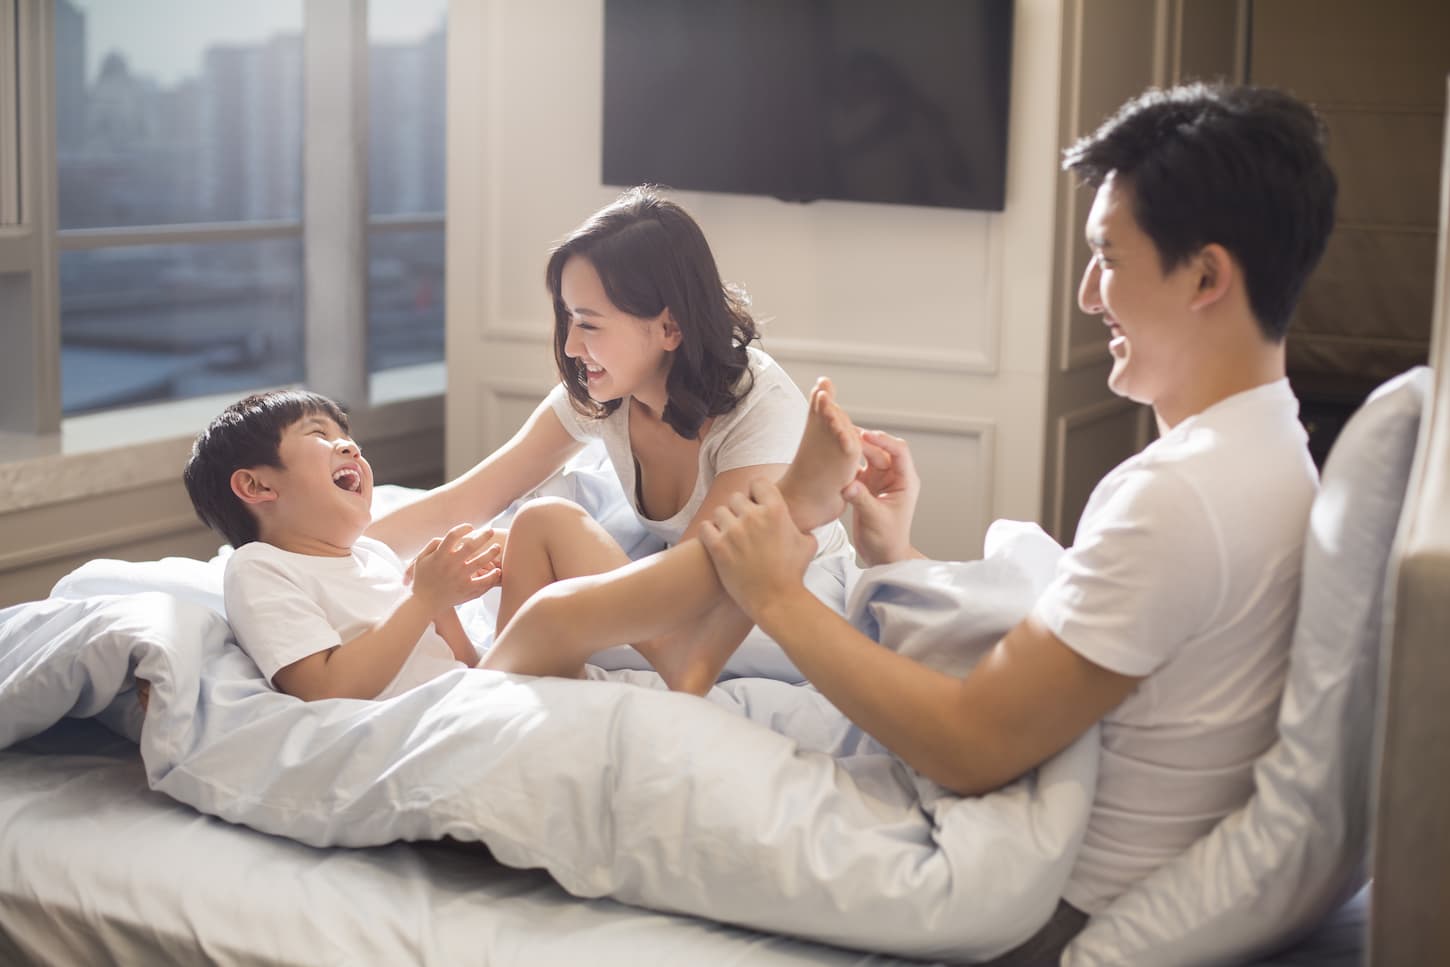 An image of a Cheerful young family having fun on a bed.